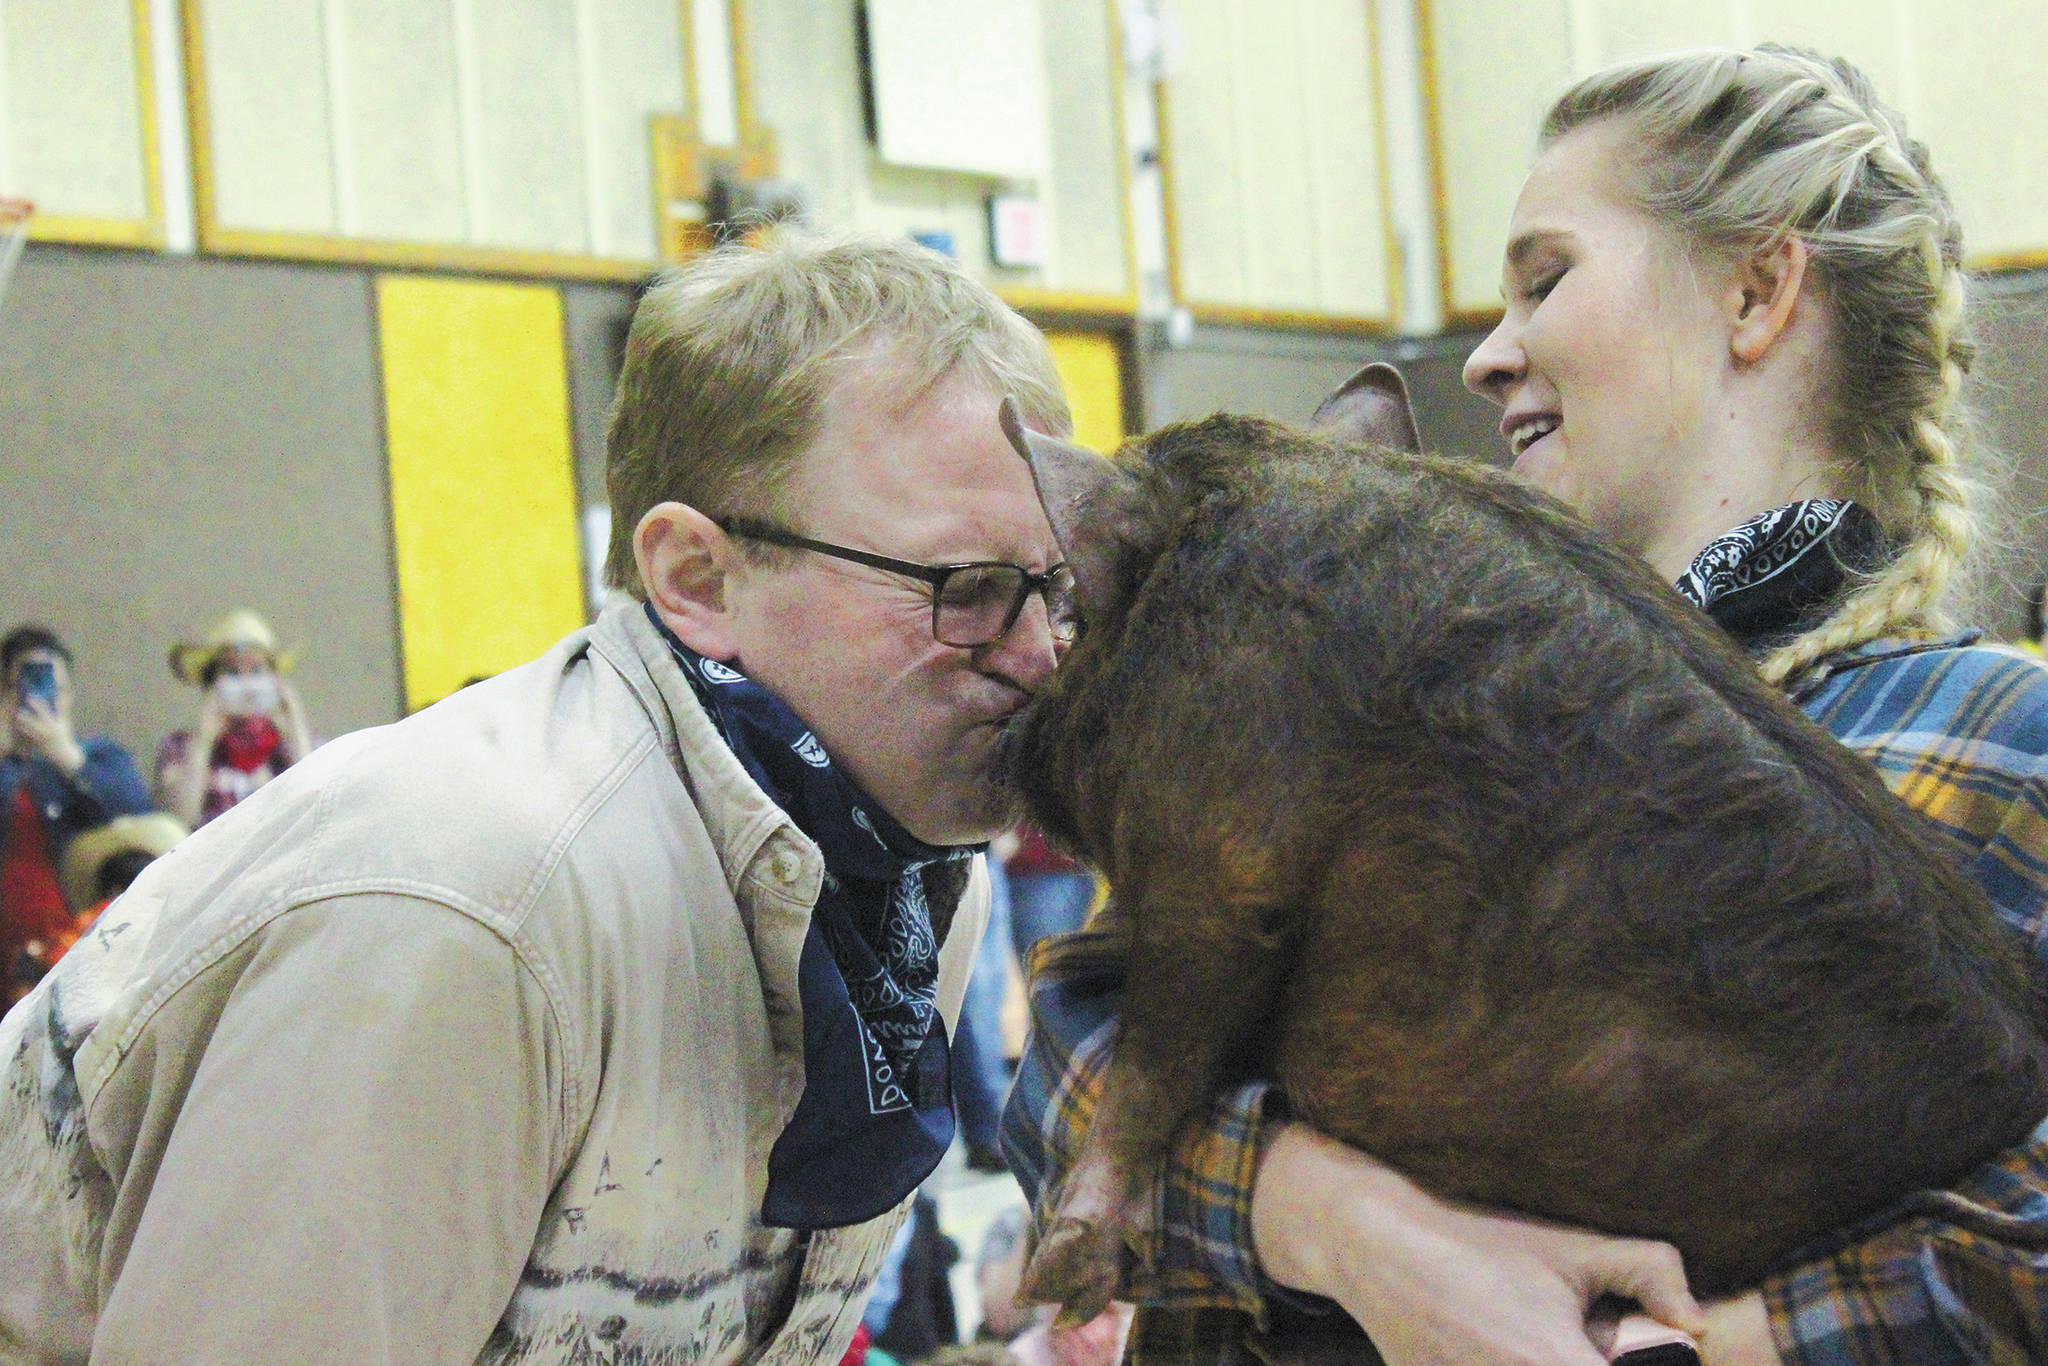 Paul Banks Elementary School Principal Eric Pederson kisses a pig during a Thursday, March 5, 2020 wild west-themed assembly to celebrate the end of the school’s annual read-a-thon, at the school in Homer, Alaska. During the kickoff assembly for the read-a-thon, Pederson had promised his students to kiss the pig if they were able read for a collective 150,000 minutes. (Photo by Megan Pacer/Homer News)